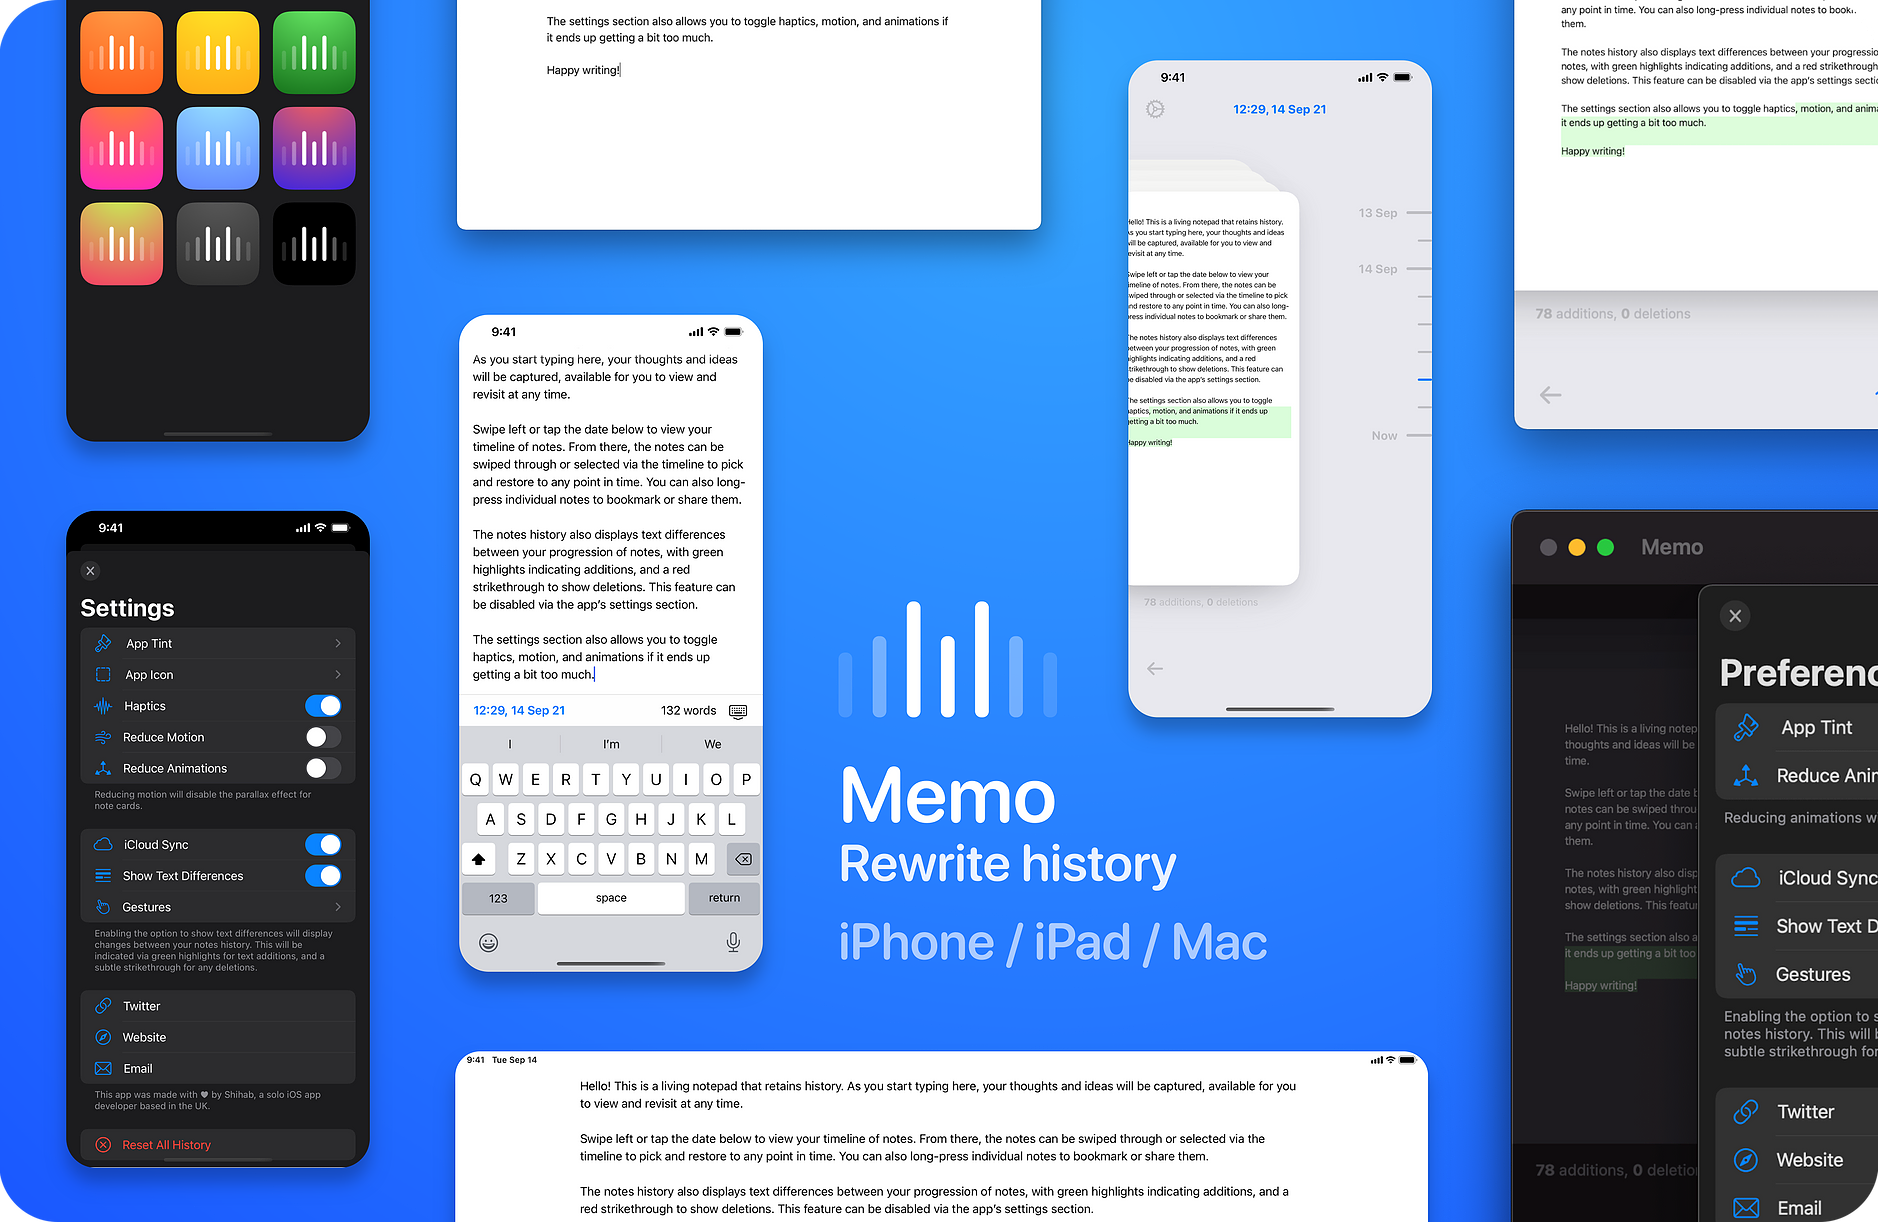 Memo is a History-Based Notes App